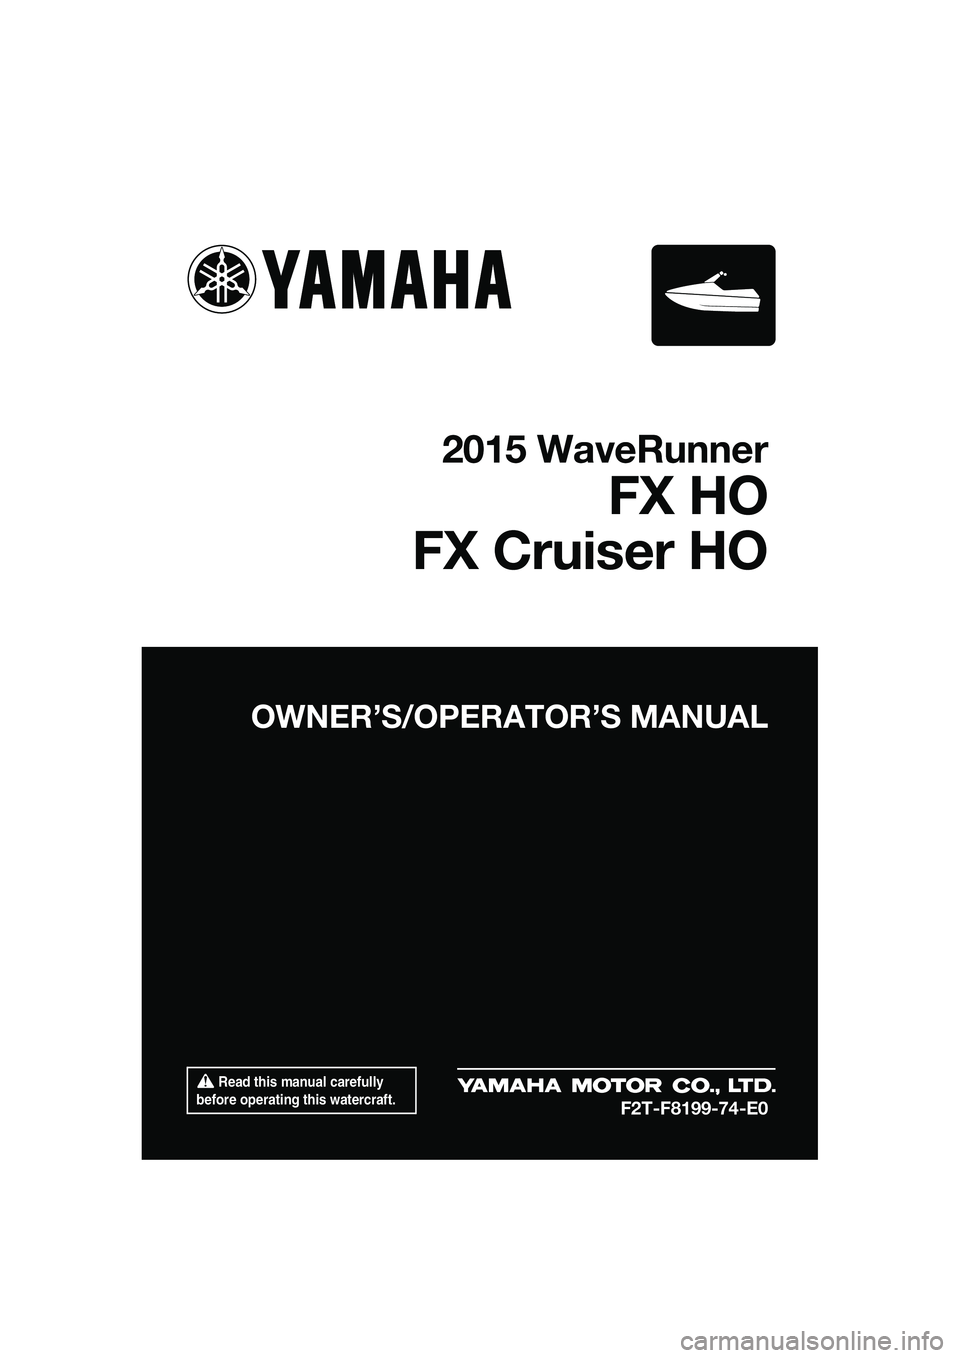 YAMAHA FX HO 2015  Owners Manual  Read this manual carefully 
before operating this watercraft.
OWNER’S/OPERAT OR’S MANUAL
2015 WaveRunner
FX HO
FX Cruiser HO
F2T-F8199-74-E0
UF2T74E0.book  Page 1  Wednesday, July 2, 2014  11:17 